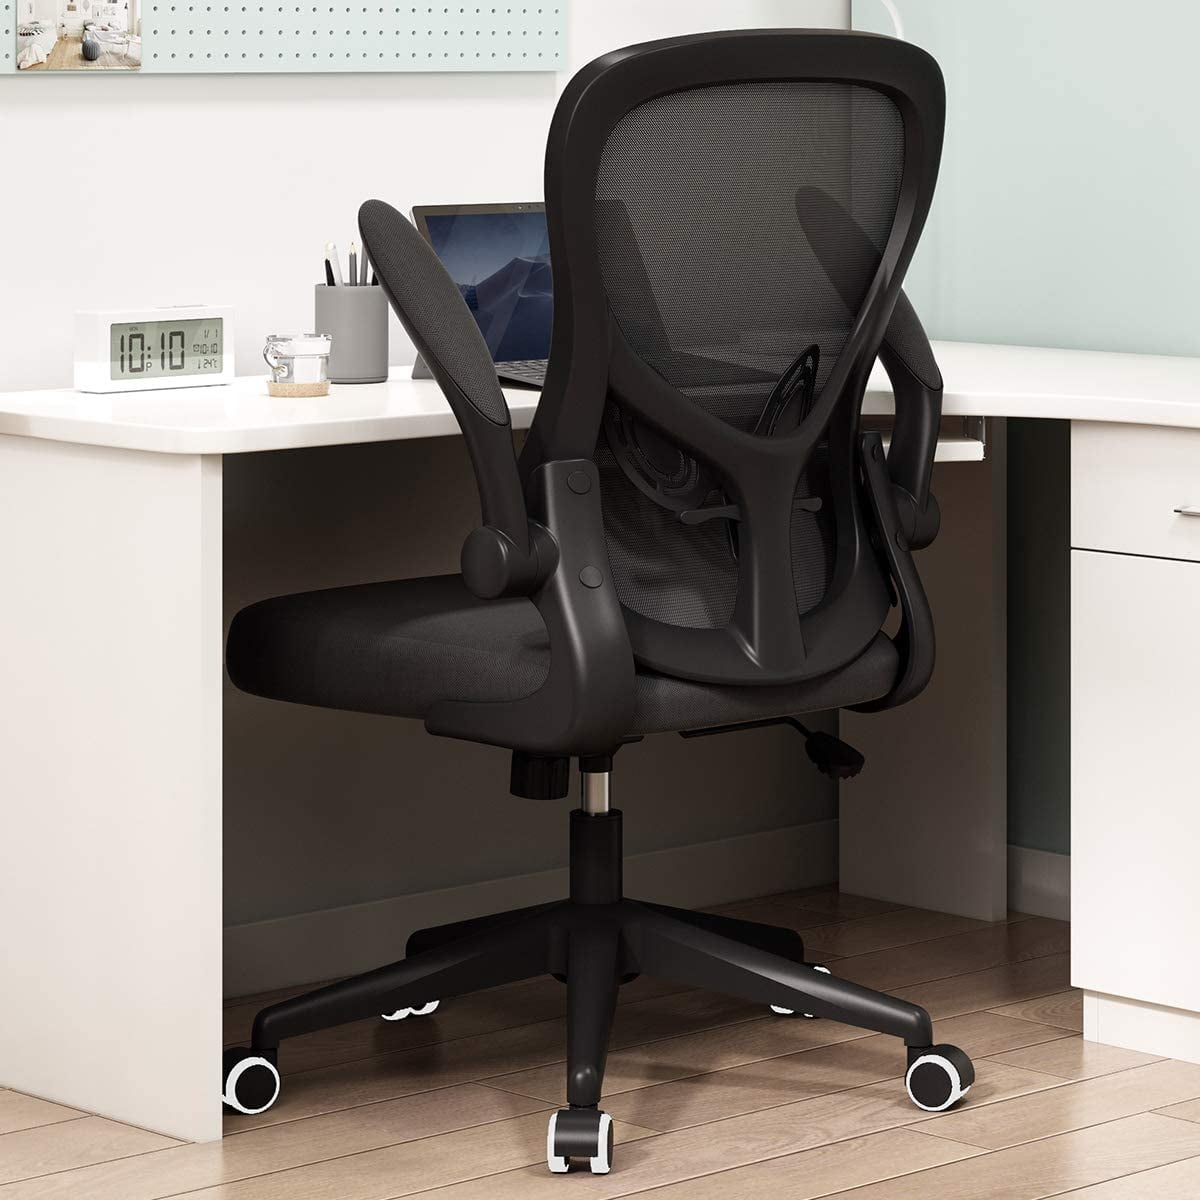 Ergonomic Desk Chair HDNY163WM/CB Mesh Chair Details about   New Opened Hbada Office Chair 